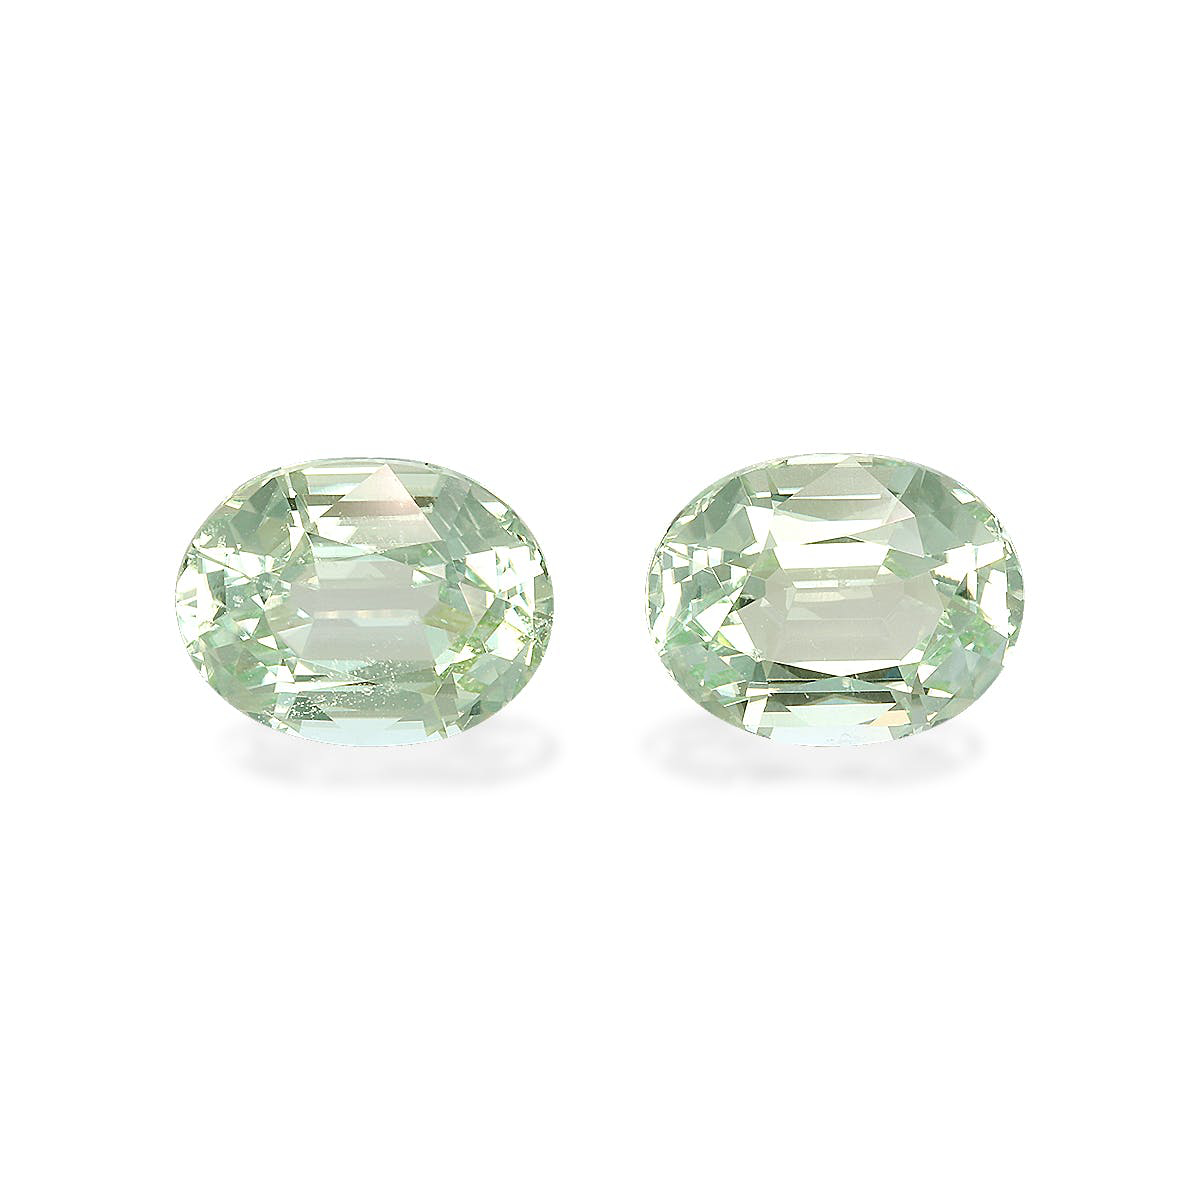 Picture of Mist Green Tourmaline 8.19ct - 11x9mm Pair (TG1544)